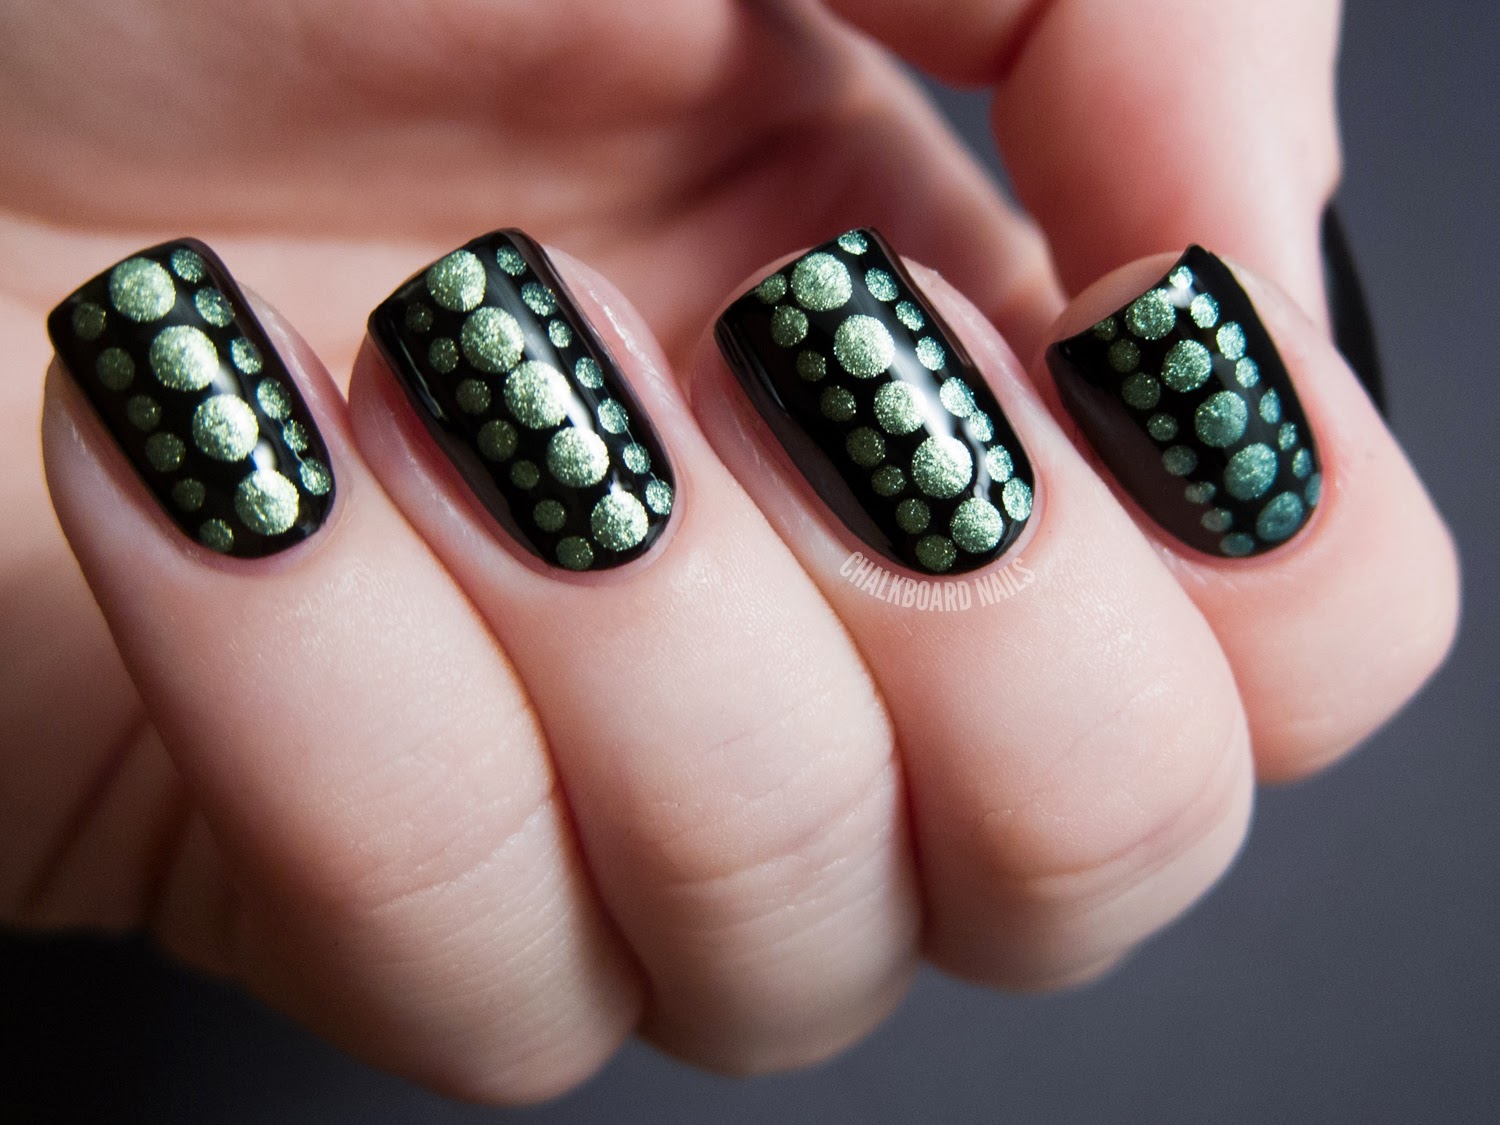 1. Simple Dot Nail Art Designs for Beginners - wide 7